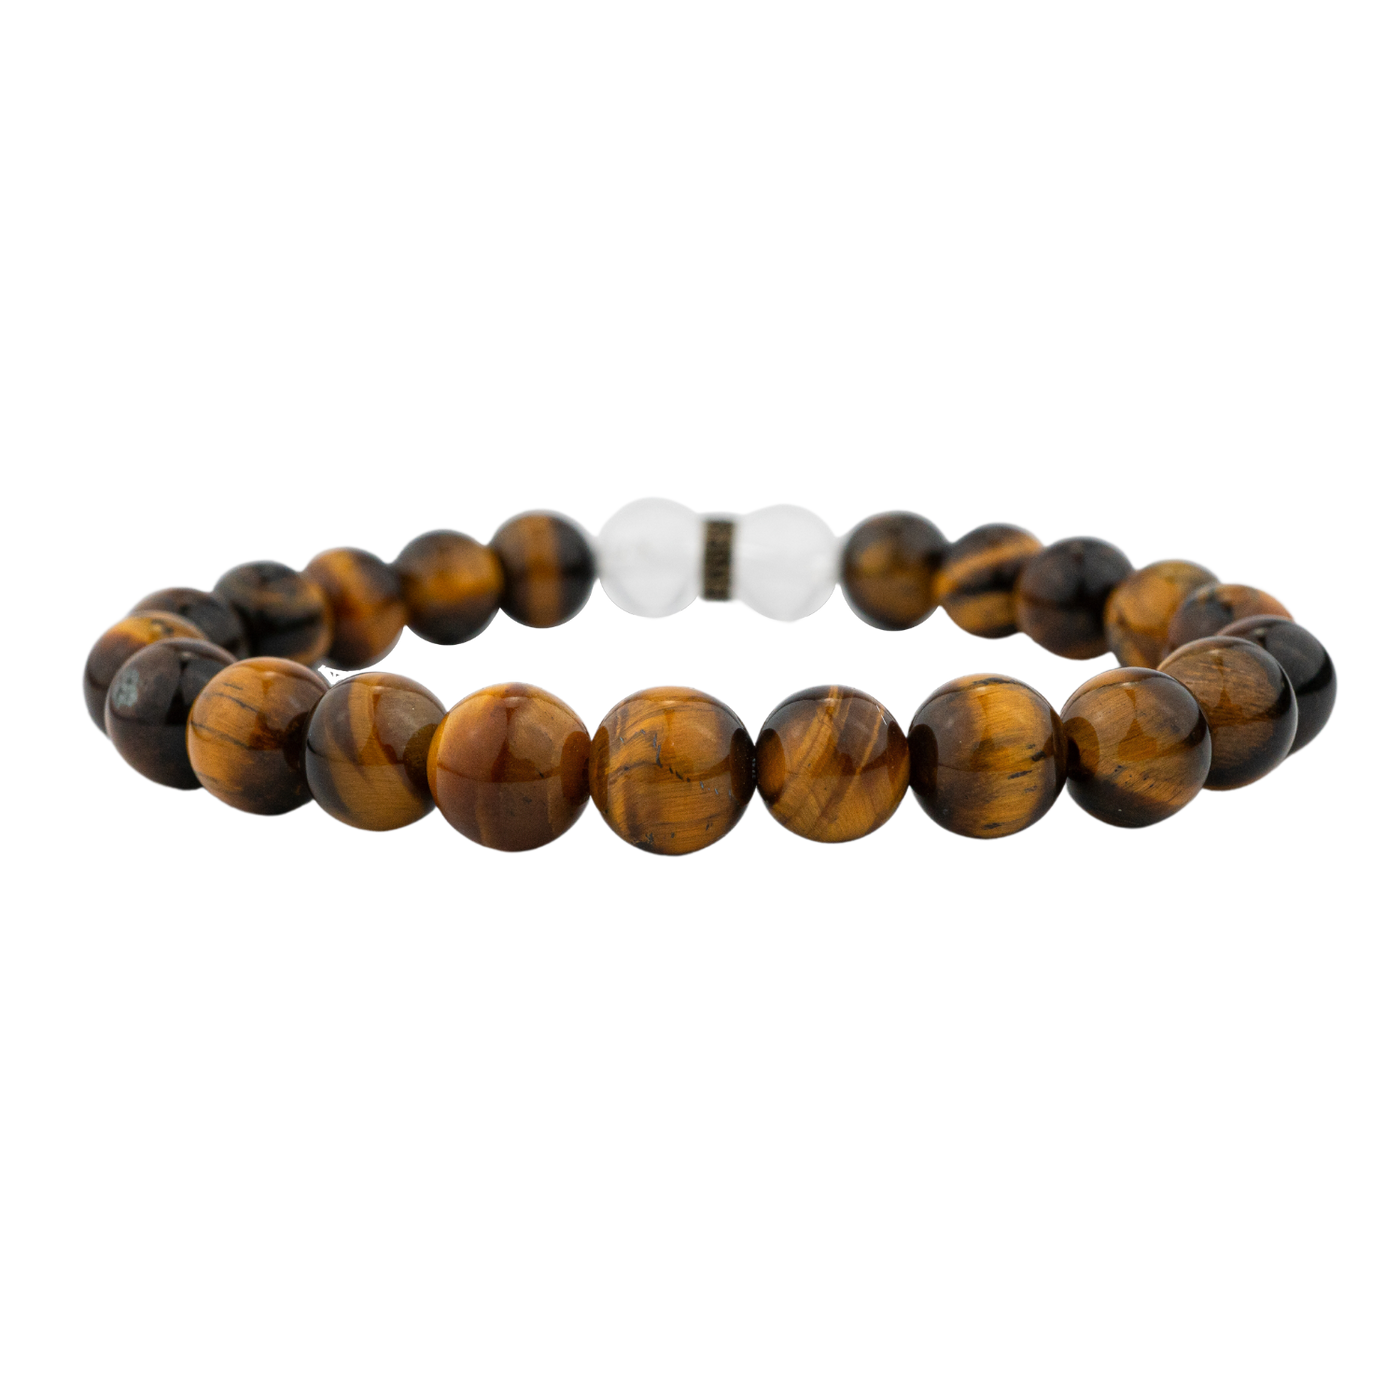 Tiger's Eye Bracelet, Shop Tiger's Eye Bracelets at Energy Muse